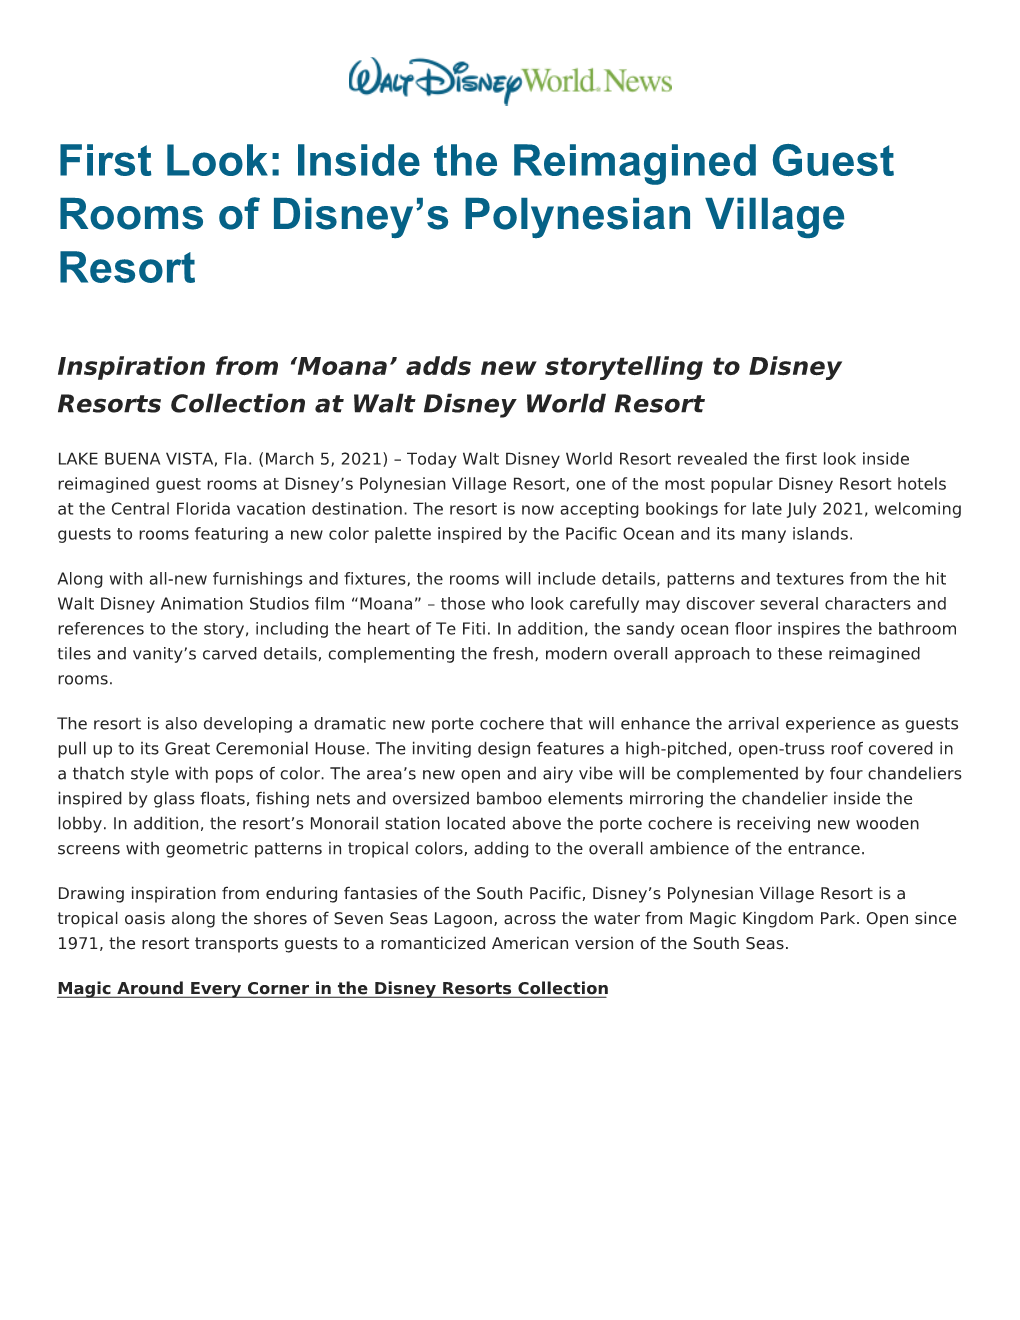 Inside the Reimagined Guest Rooms of Disney's Polynesian Village Resort